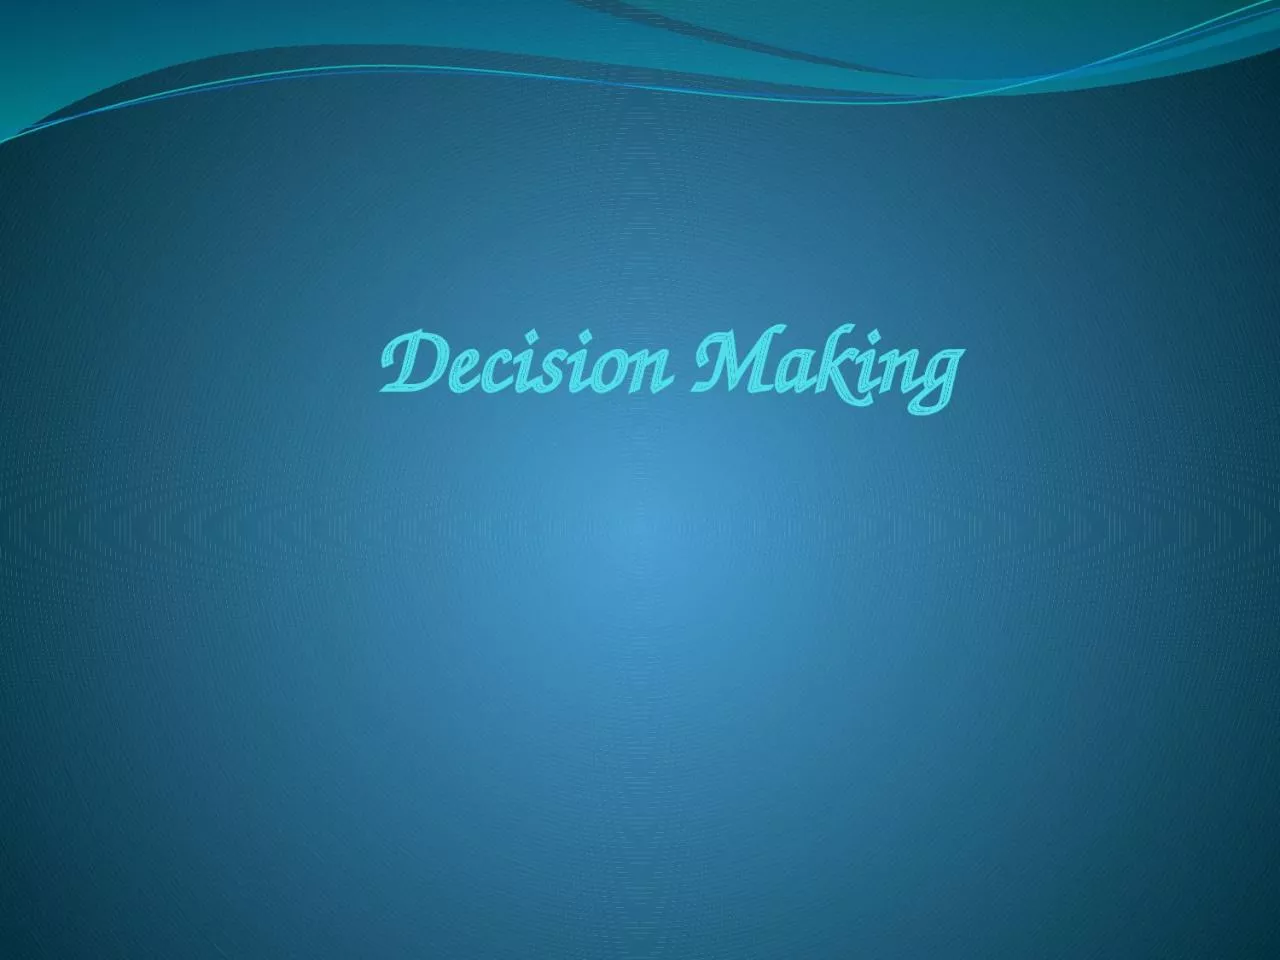 Decision Making Management science uses a scientific approach for solving management problems